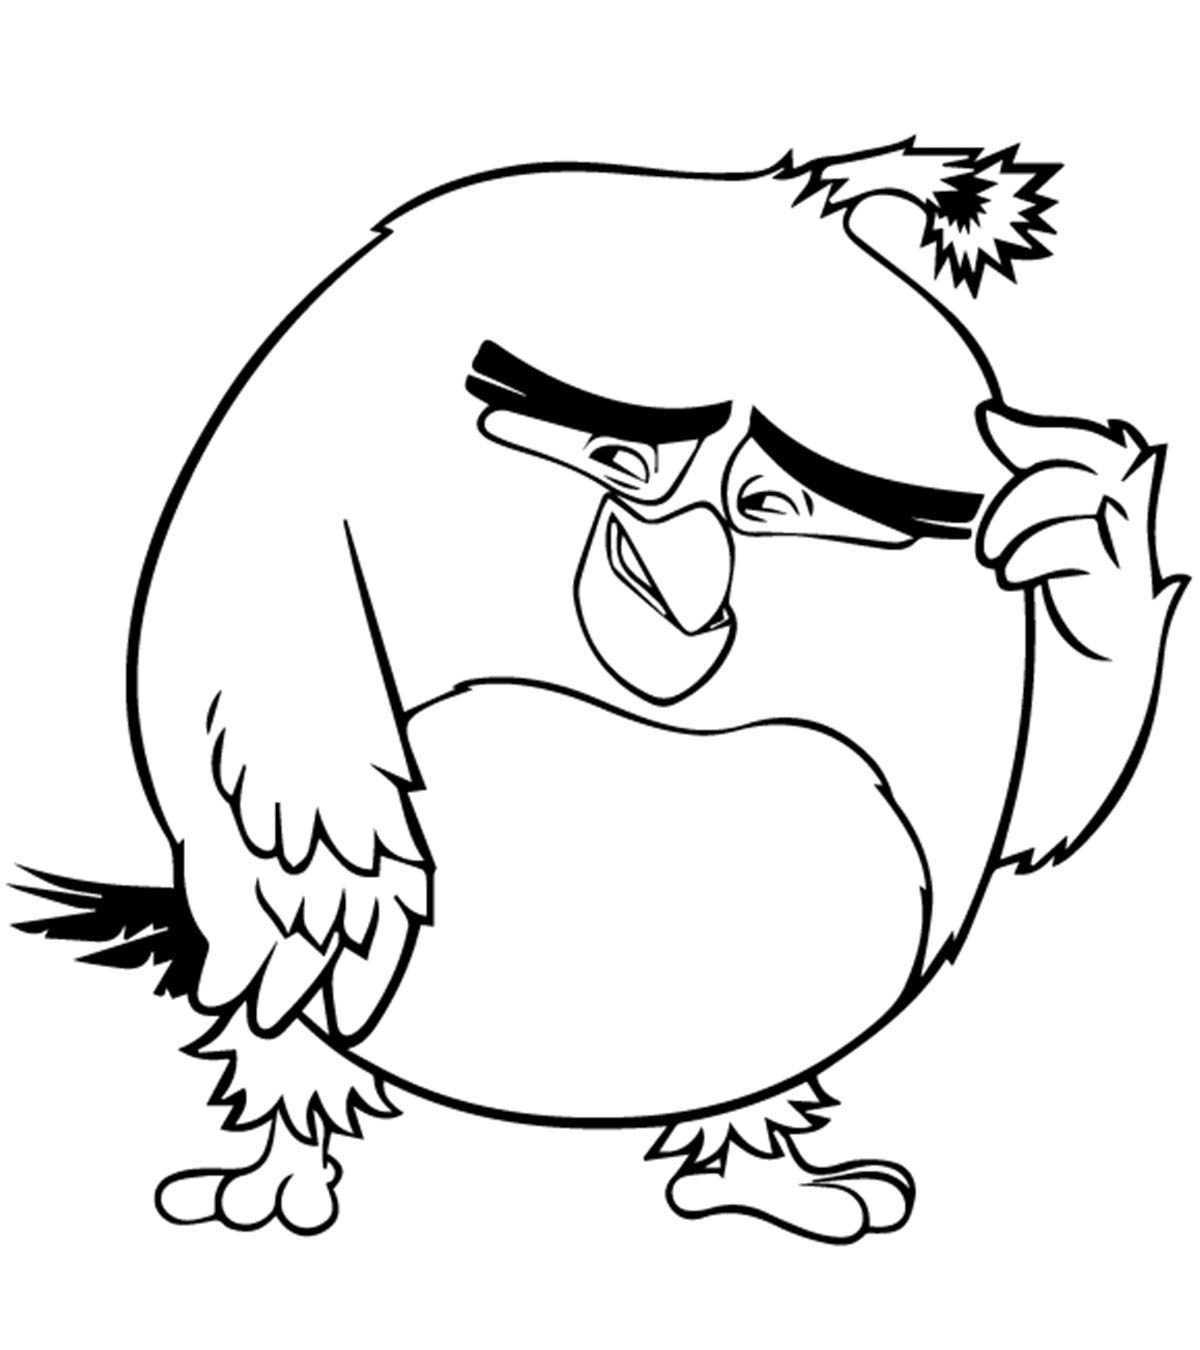 Top 40 Free Printable Angry Birds Coloring Pages For Toddlers_image